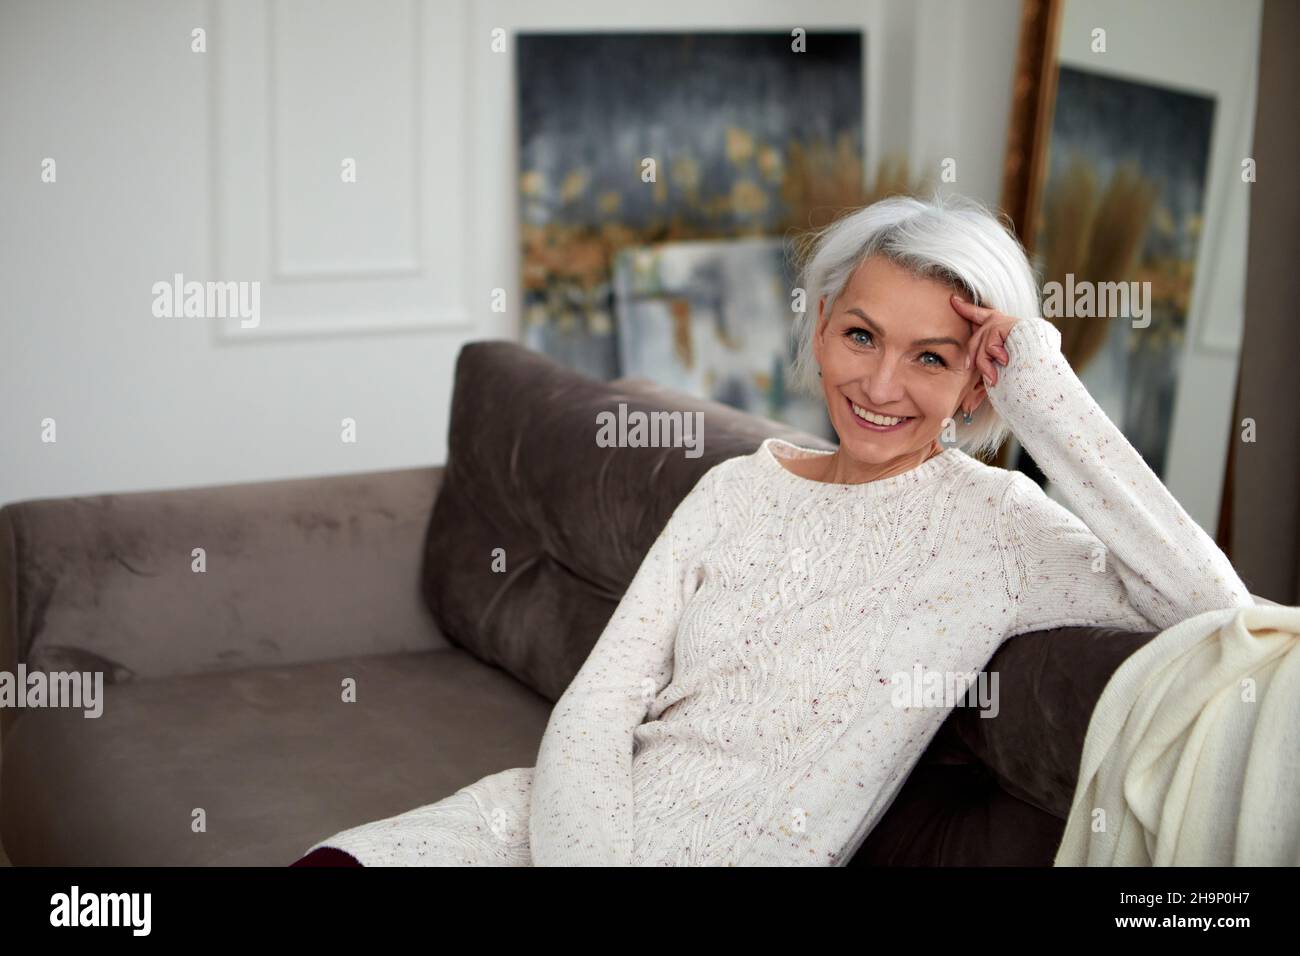 Charming mature female in knitted sweater and with gray hair sitting on comfortable sofa and leaning on hand while looking at camera with smile Stock Photo